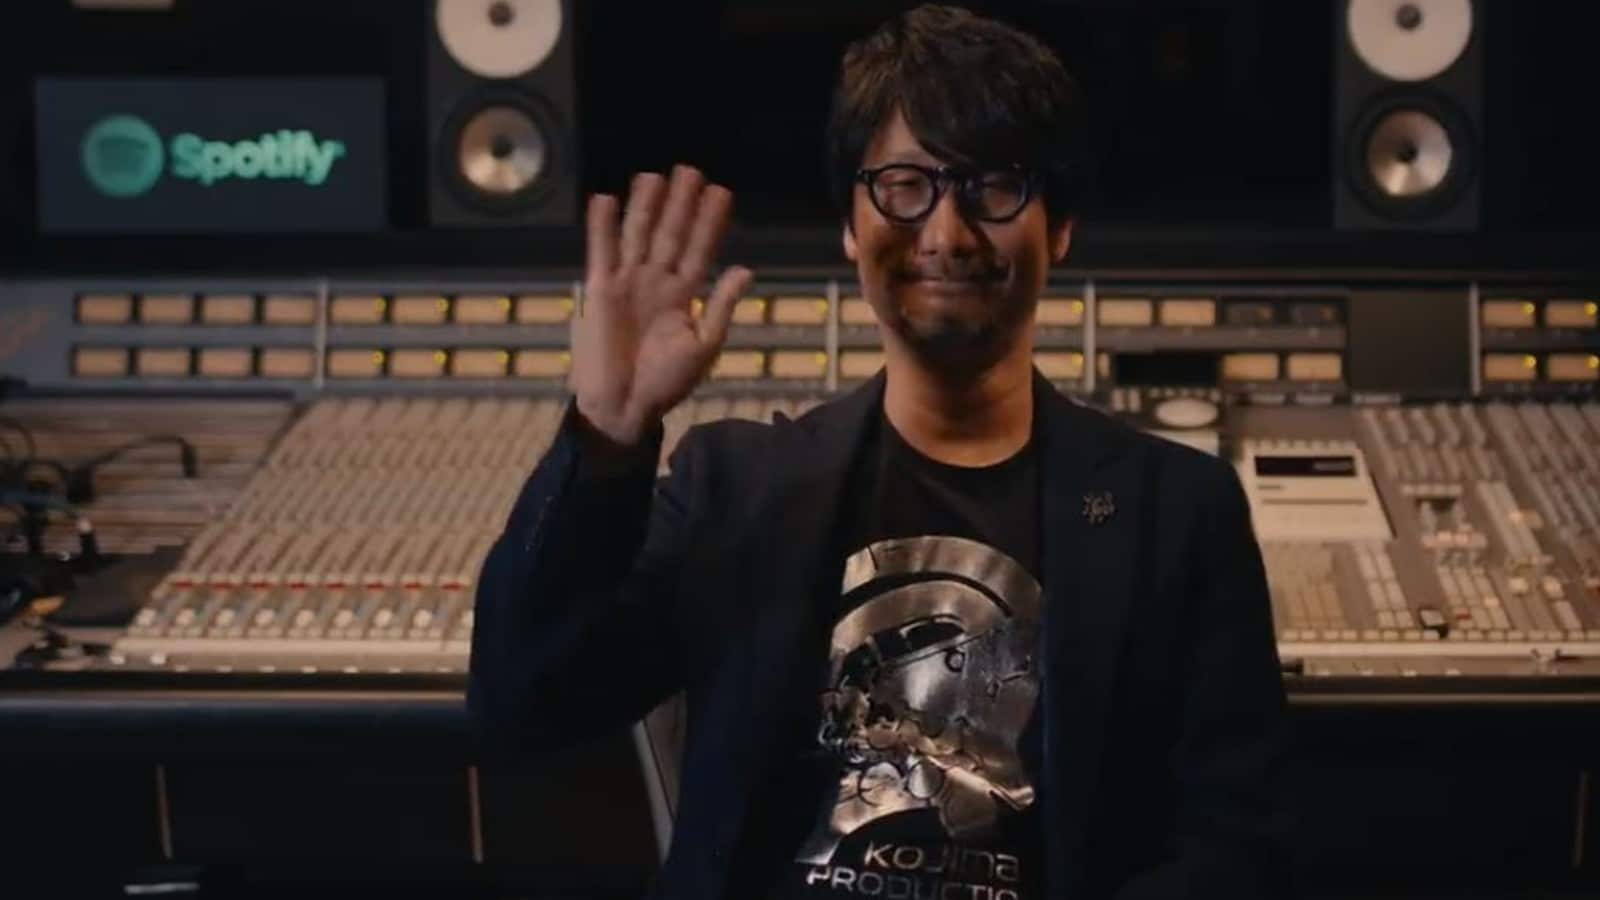 Hideo Kojima discusses his partnership with Spotify.